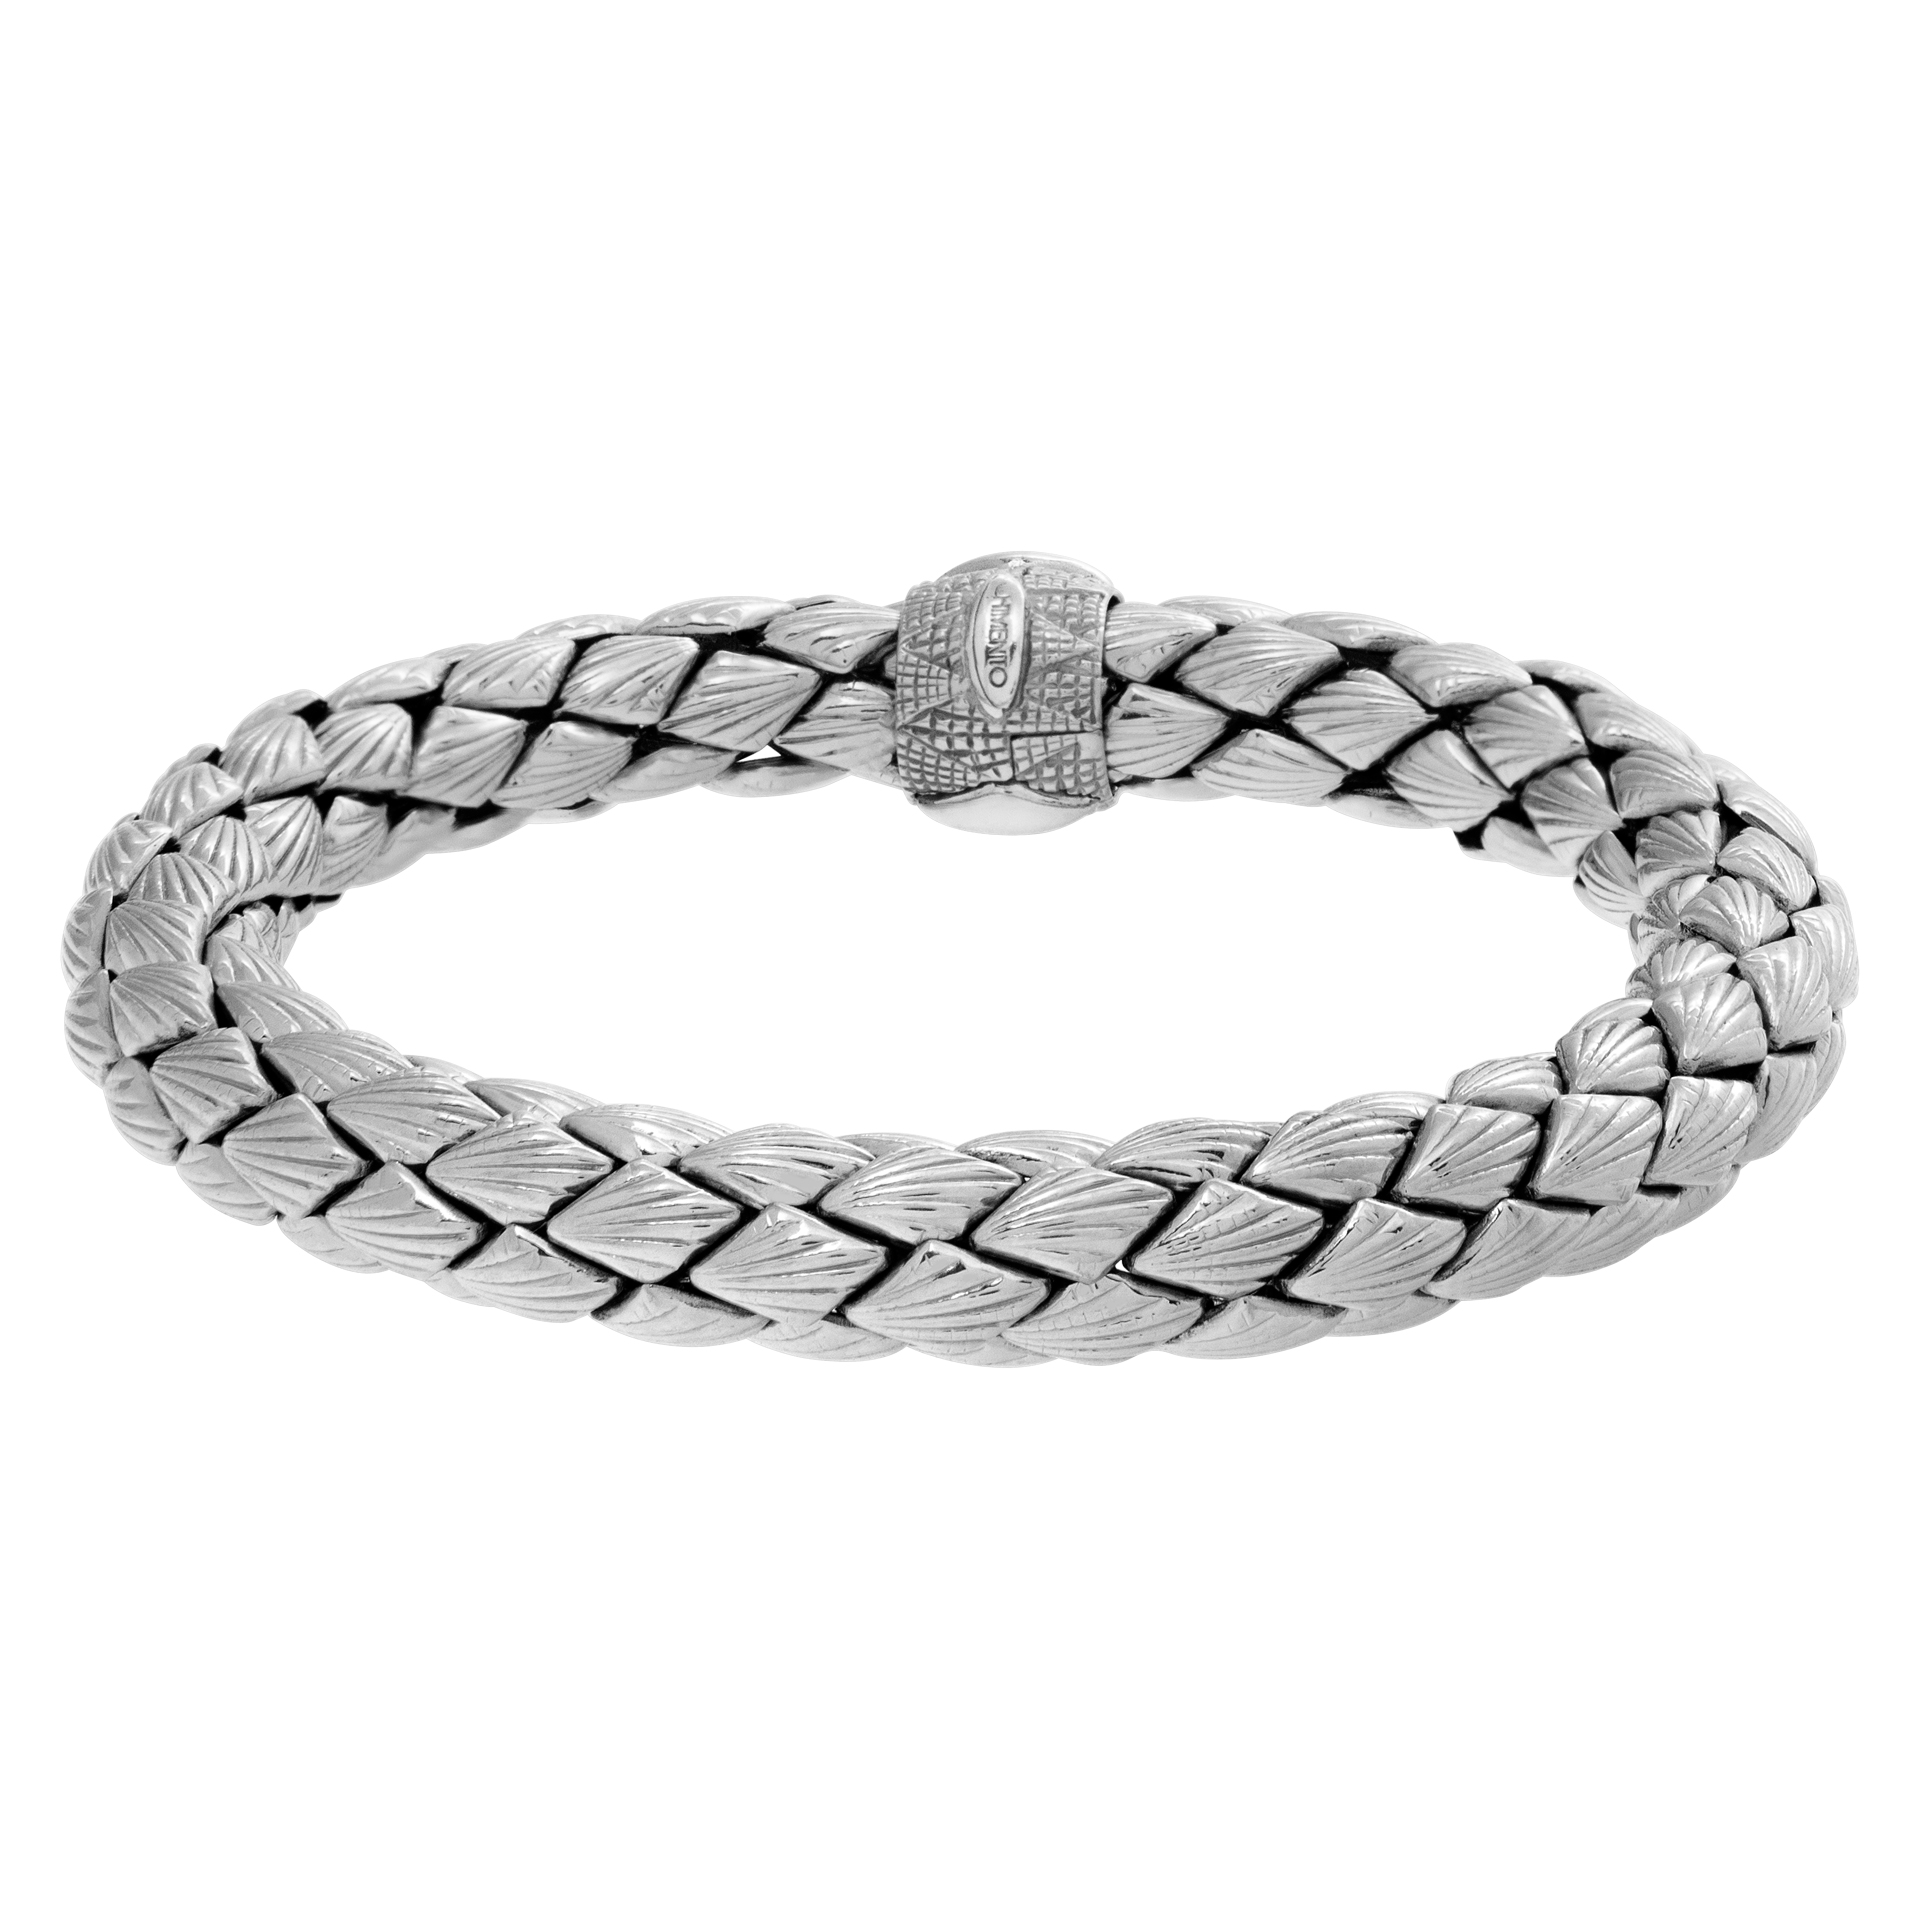 Chimento breaded bracelet in 18k white gold with diamond accent on the clasp.